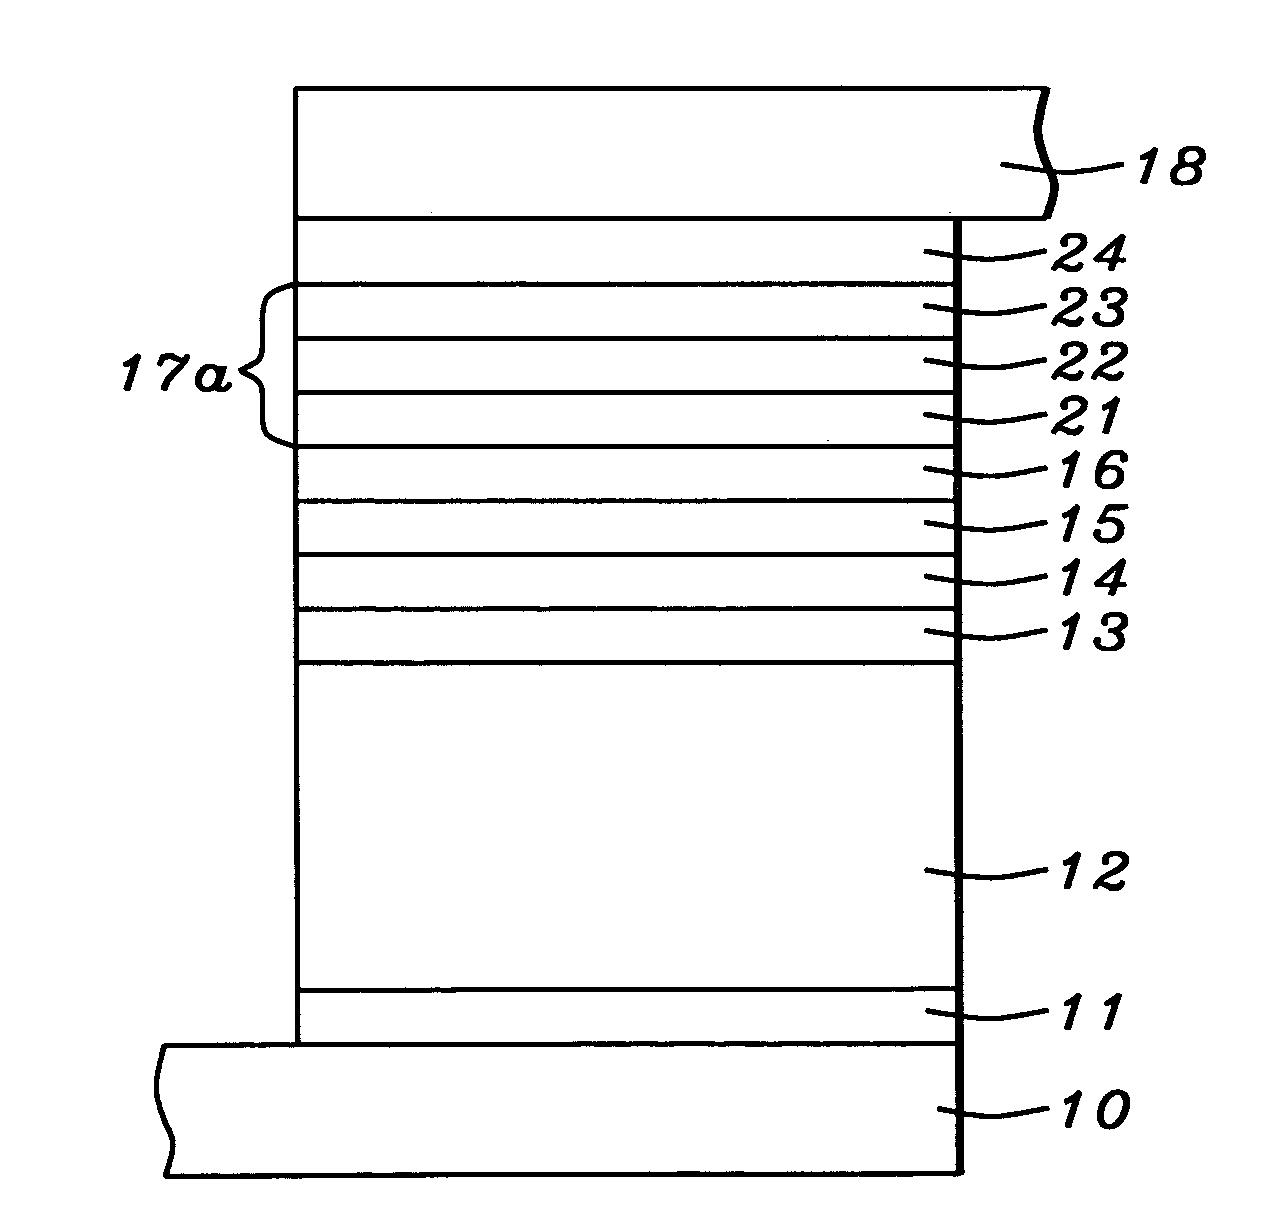 Structure and process for composite free layer in CPP GMR device